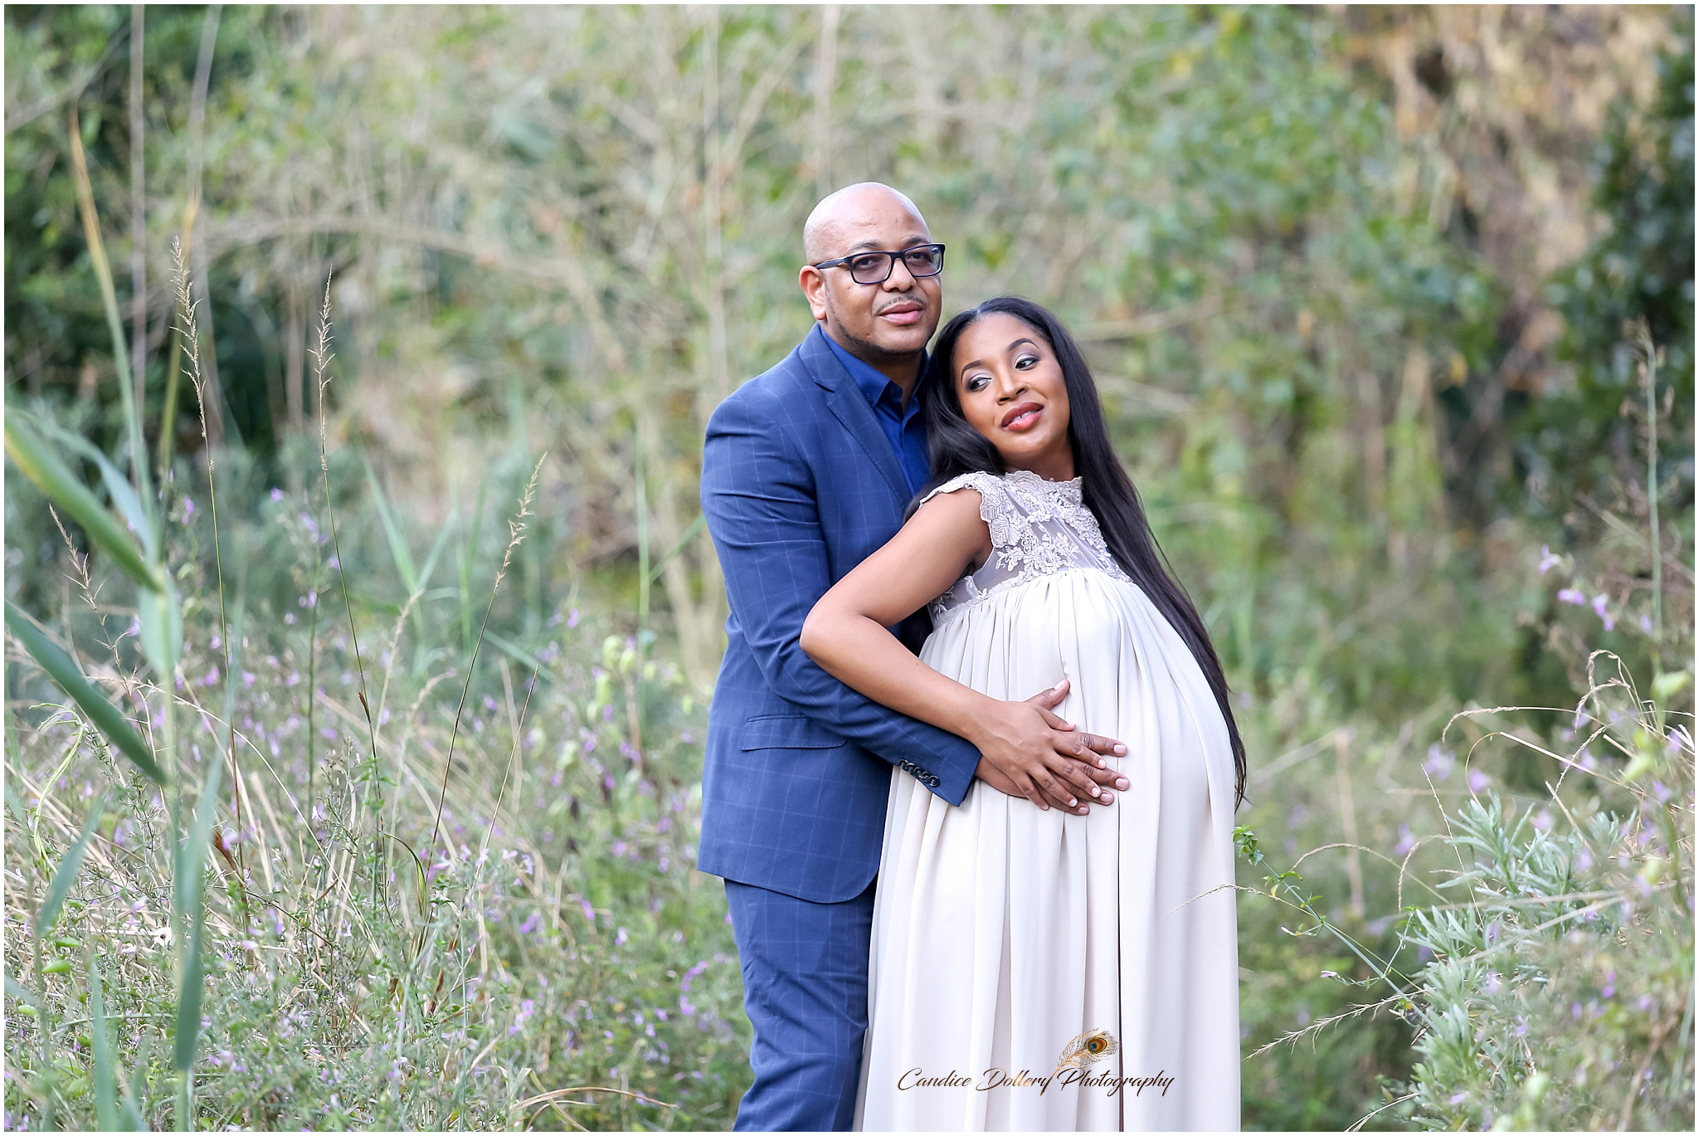 Nthabie & Lawrence - Candice Dollery_1726